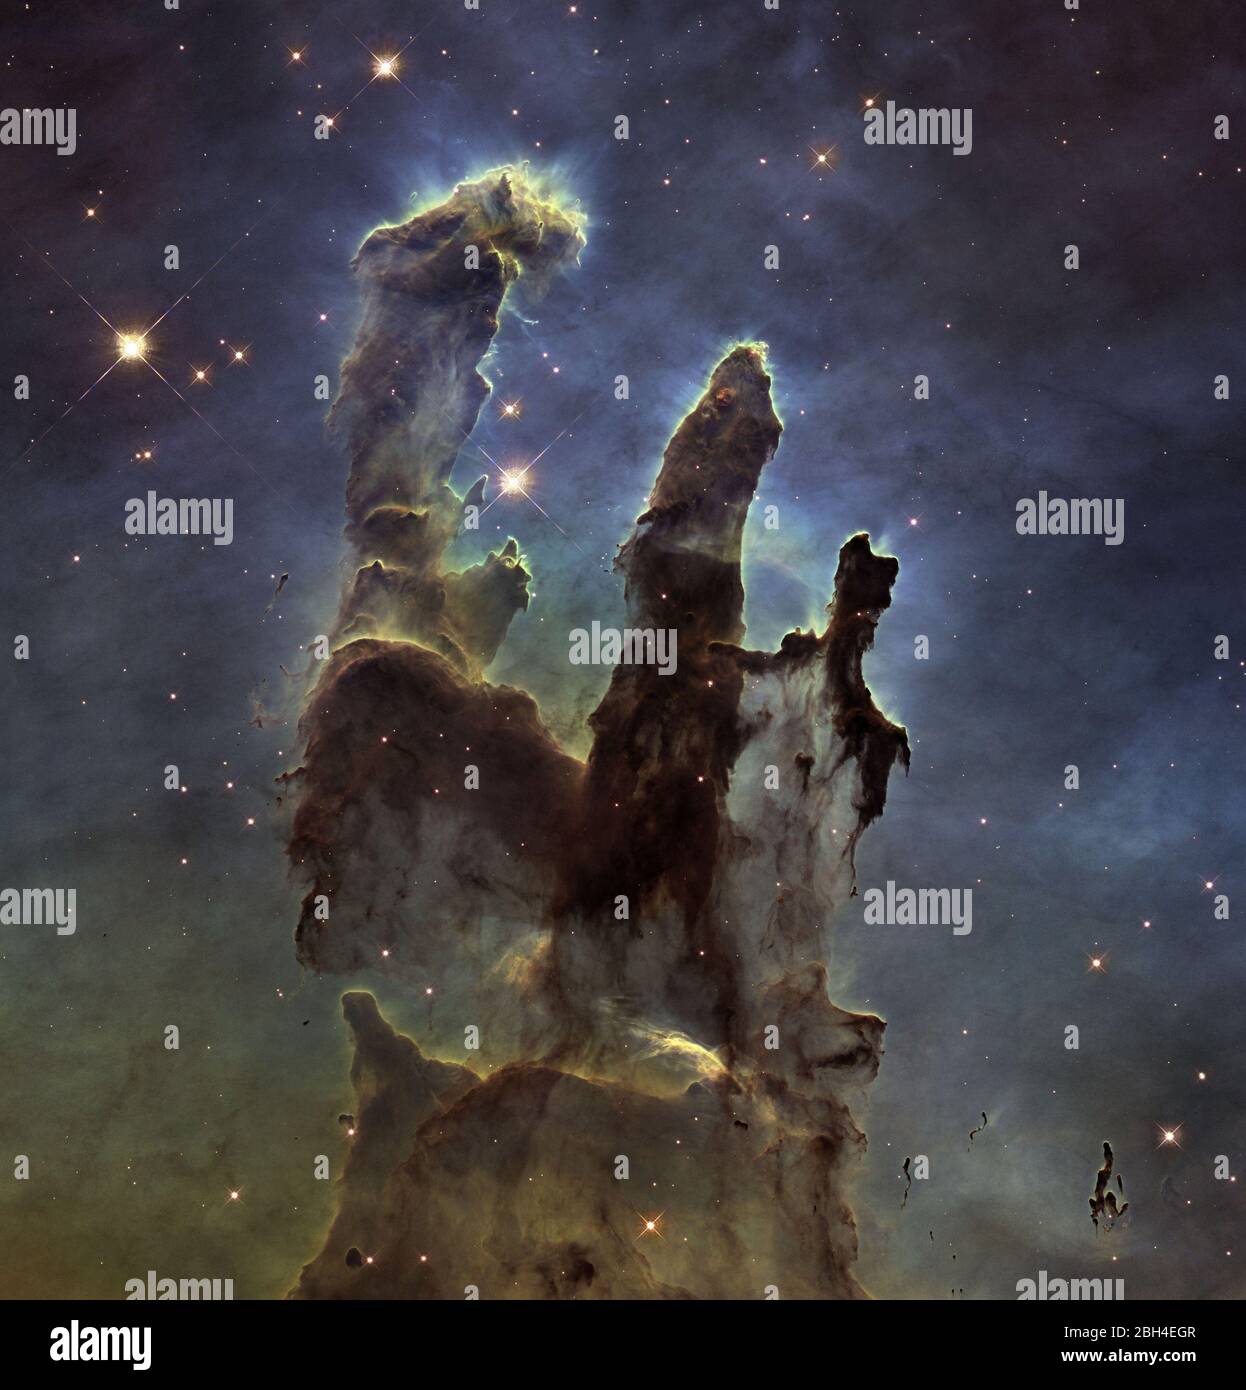 The NASA/ESA Hubble Space Telescope has revisited one of its most iconic and popular images: the Eagle Nebula's Pillars of Creation. This image shows the pillars as seen in visible light, capturing the multi-colored glow of gas clouds, wispy tendrils of dark cosmic dust, and the rust-colored elephants' trunks of the nebula's famous pillars. The dust and gas in the pillars are seared by the intense radiation from young stars and eroded by strong winds from massive nearby stars. Stock Photo